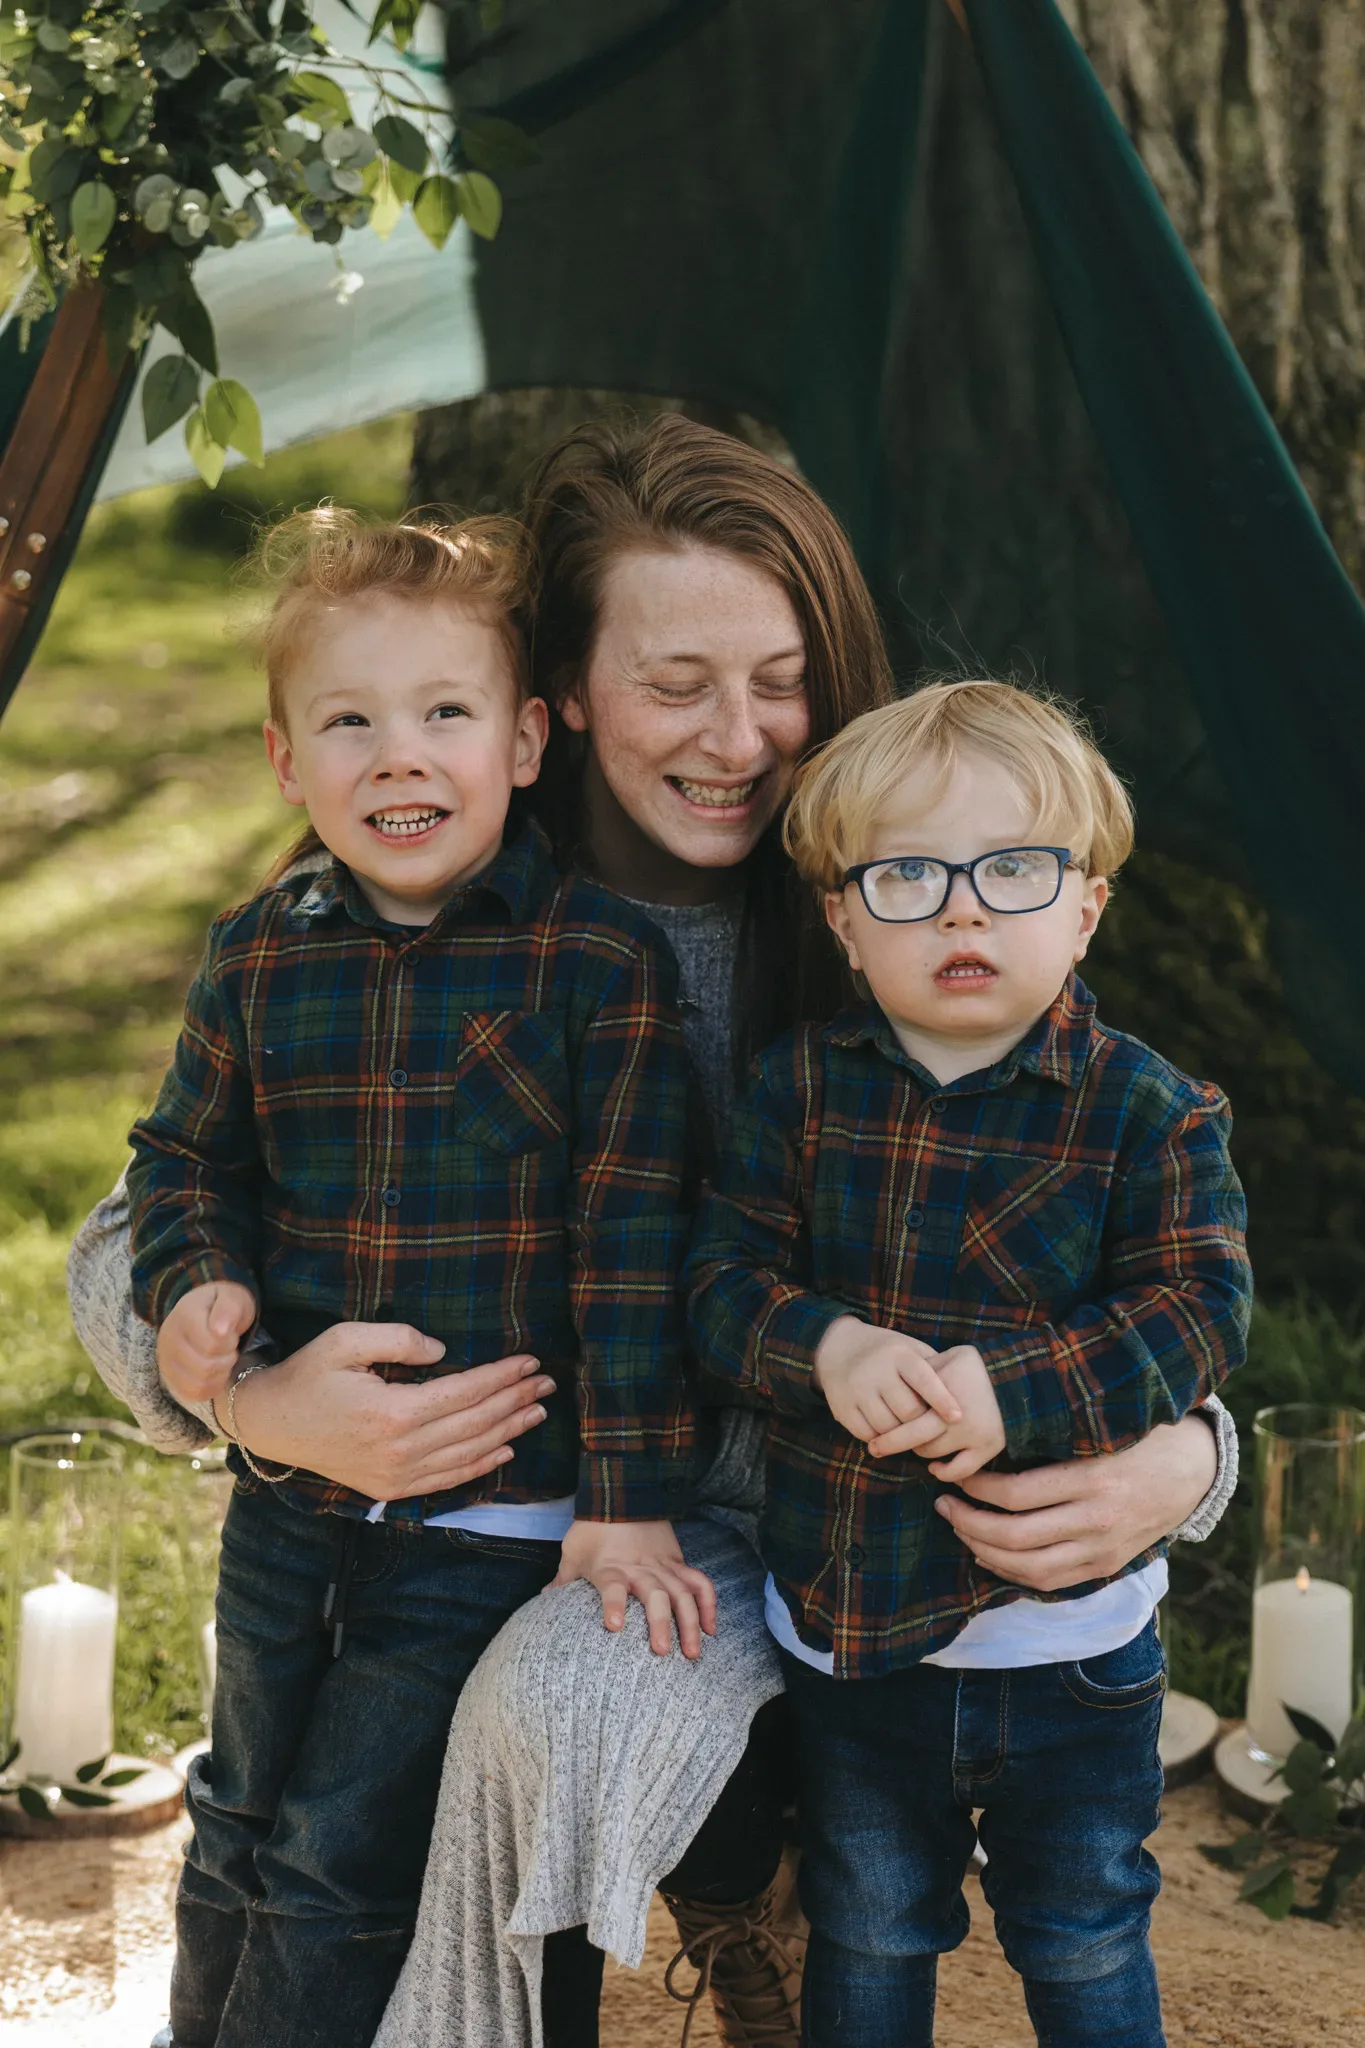 A joyful woman hugged by two young boys in plaid shirts, outdoors under a canopy, smiling brightly with candles and natural light surrounding them.